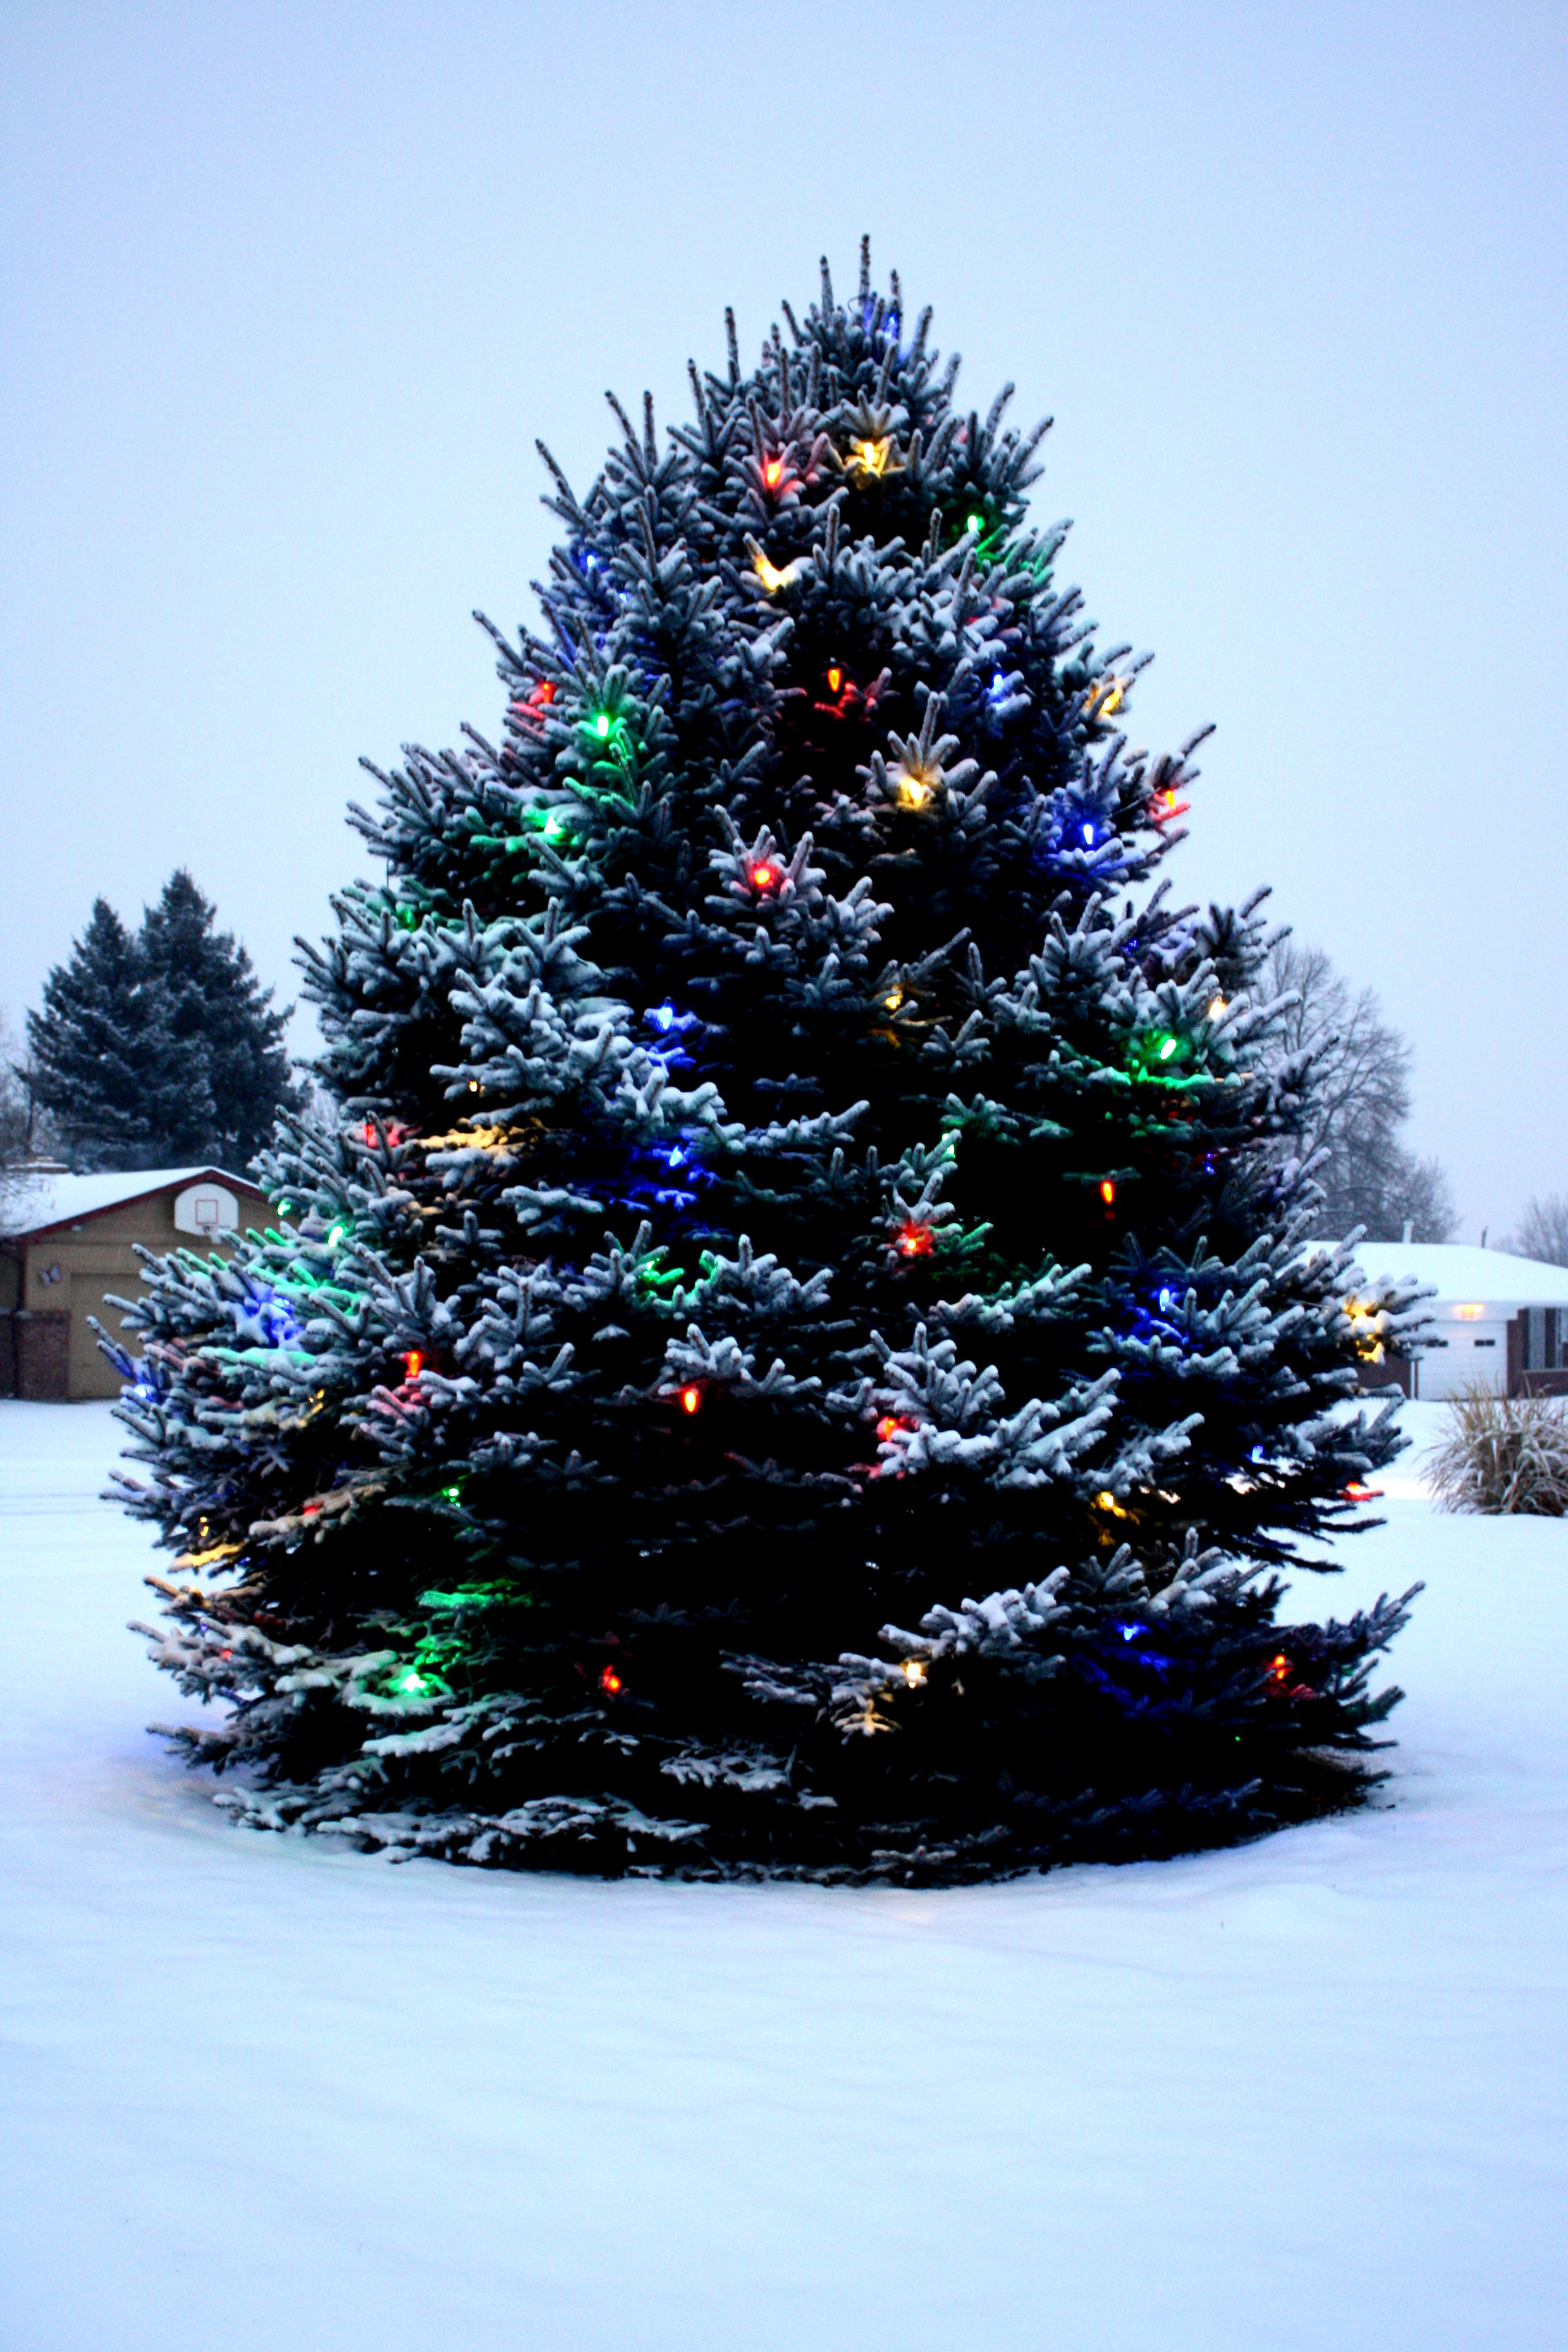 Outdoor Lighted Christmas Tree
 How to install safety Christmas lights on outdoor trees